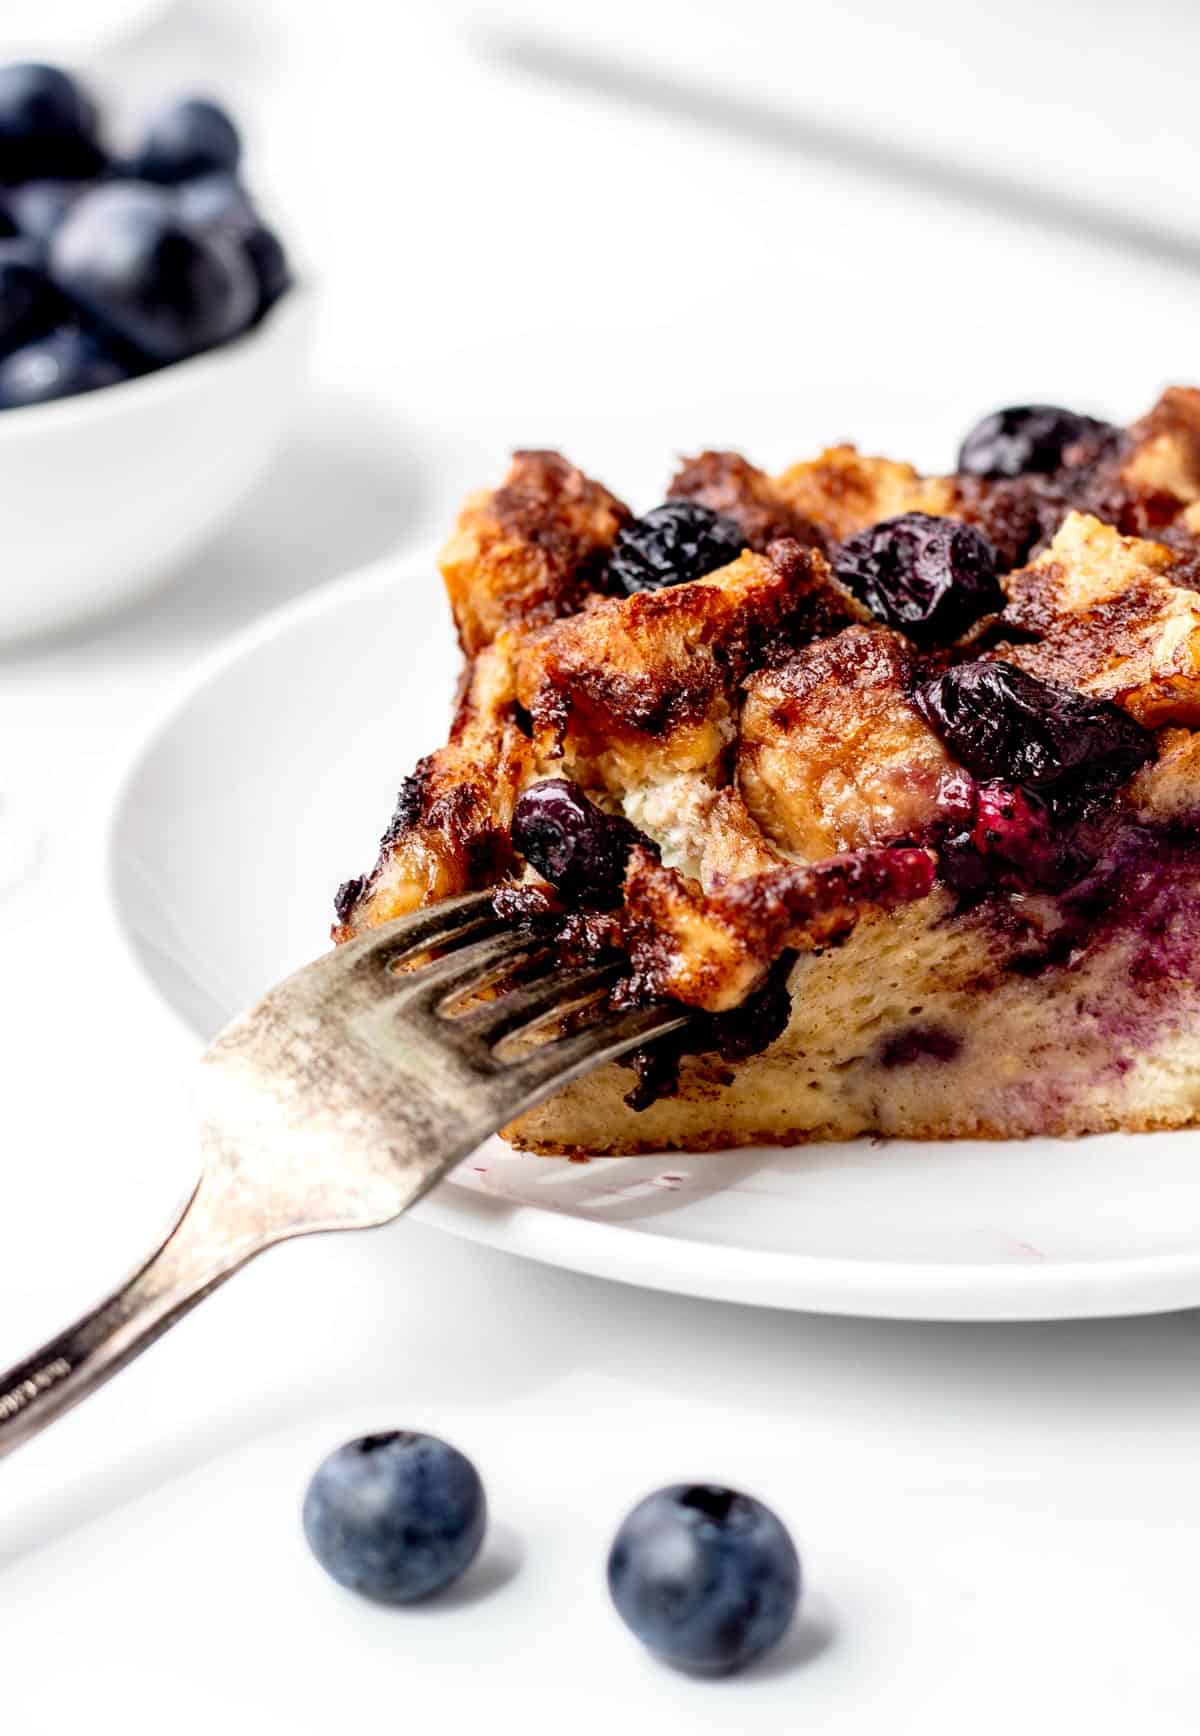 A fork digging into a slice of French toast casserole with blueberries.